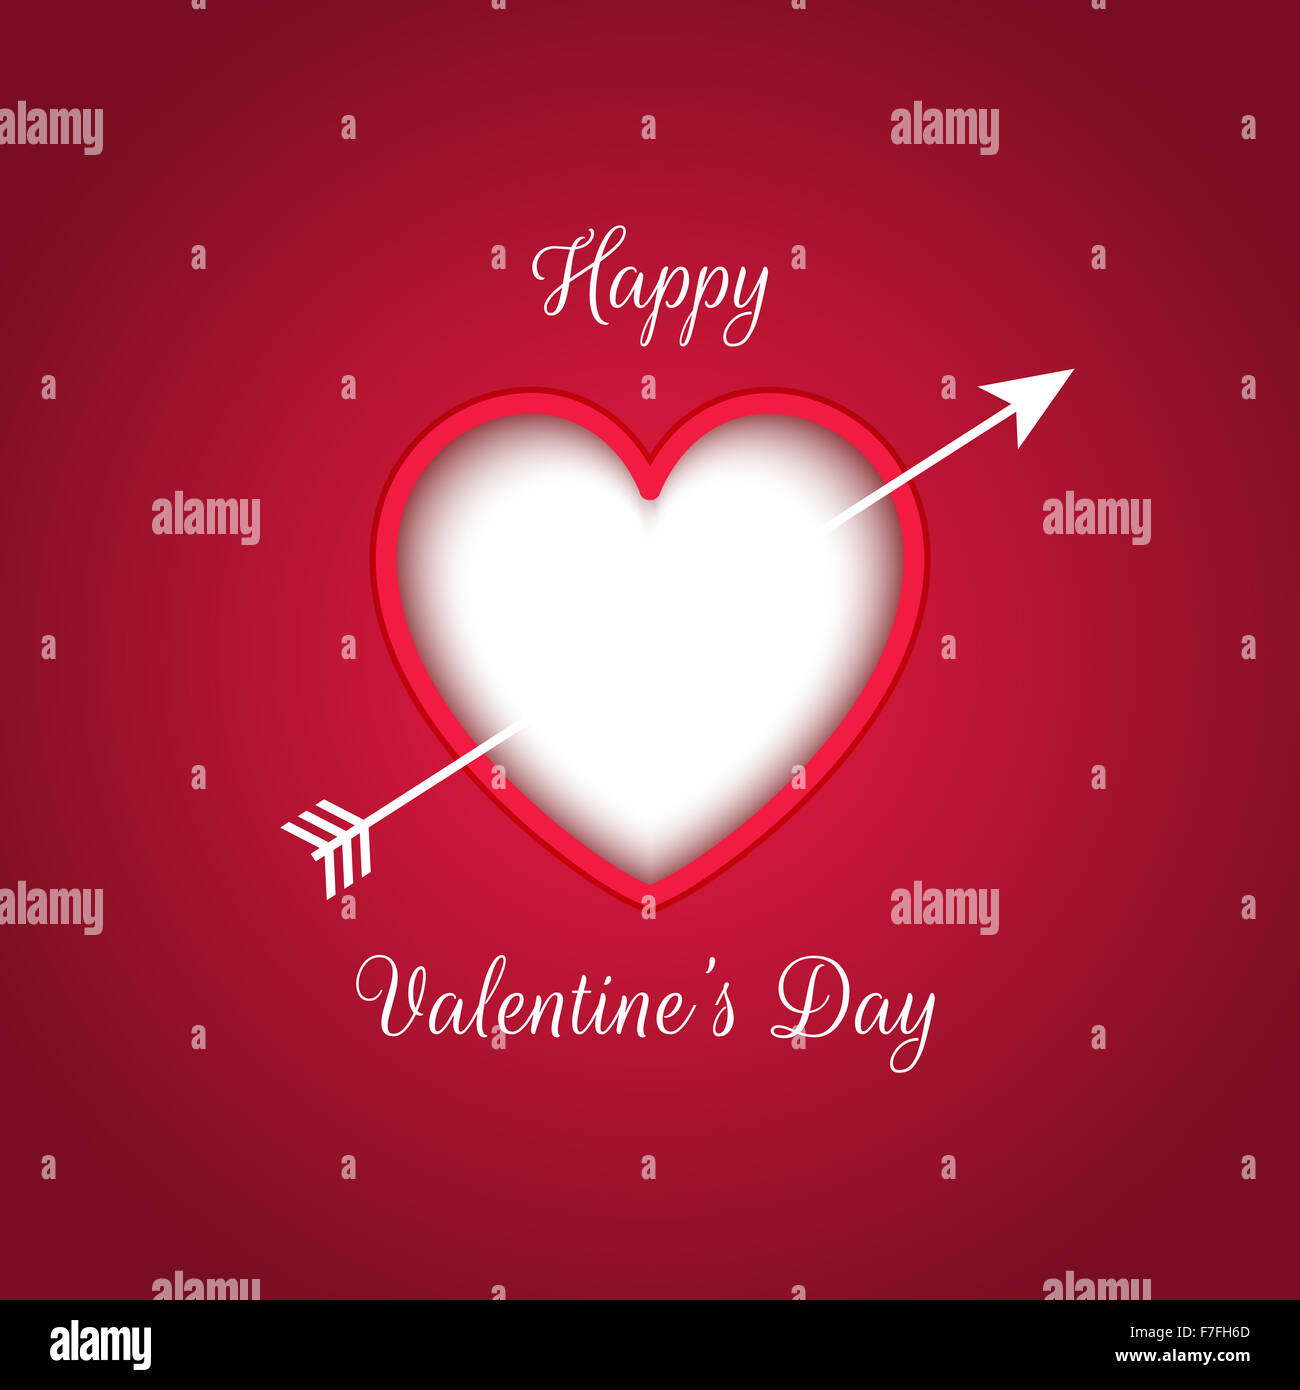 Valentines day background with heart design Stock Photo